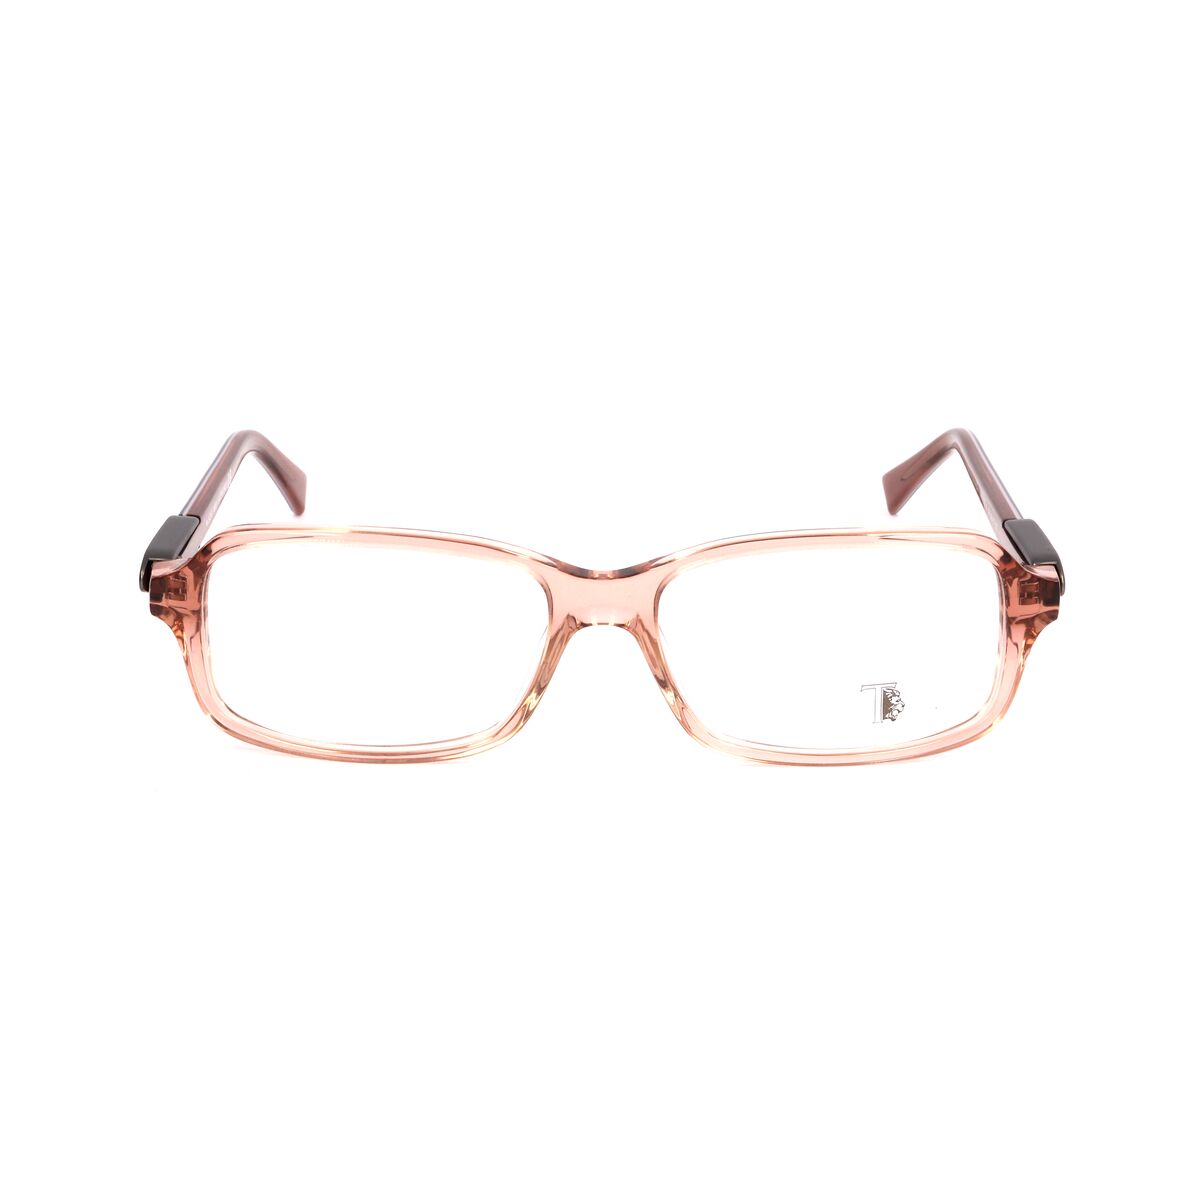 Ladies'Spectacle frame Tods TO5018-074 Pink